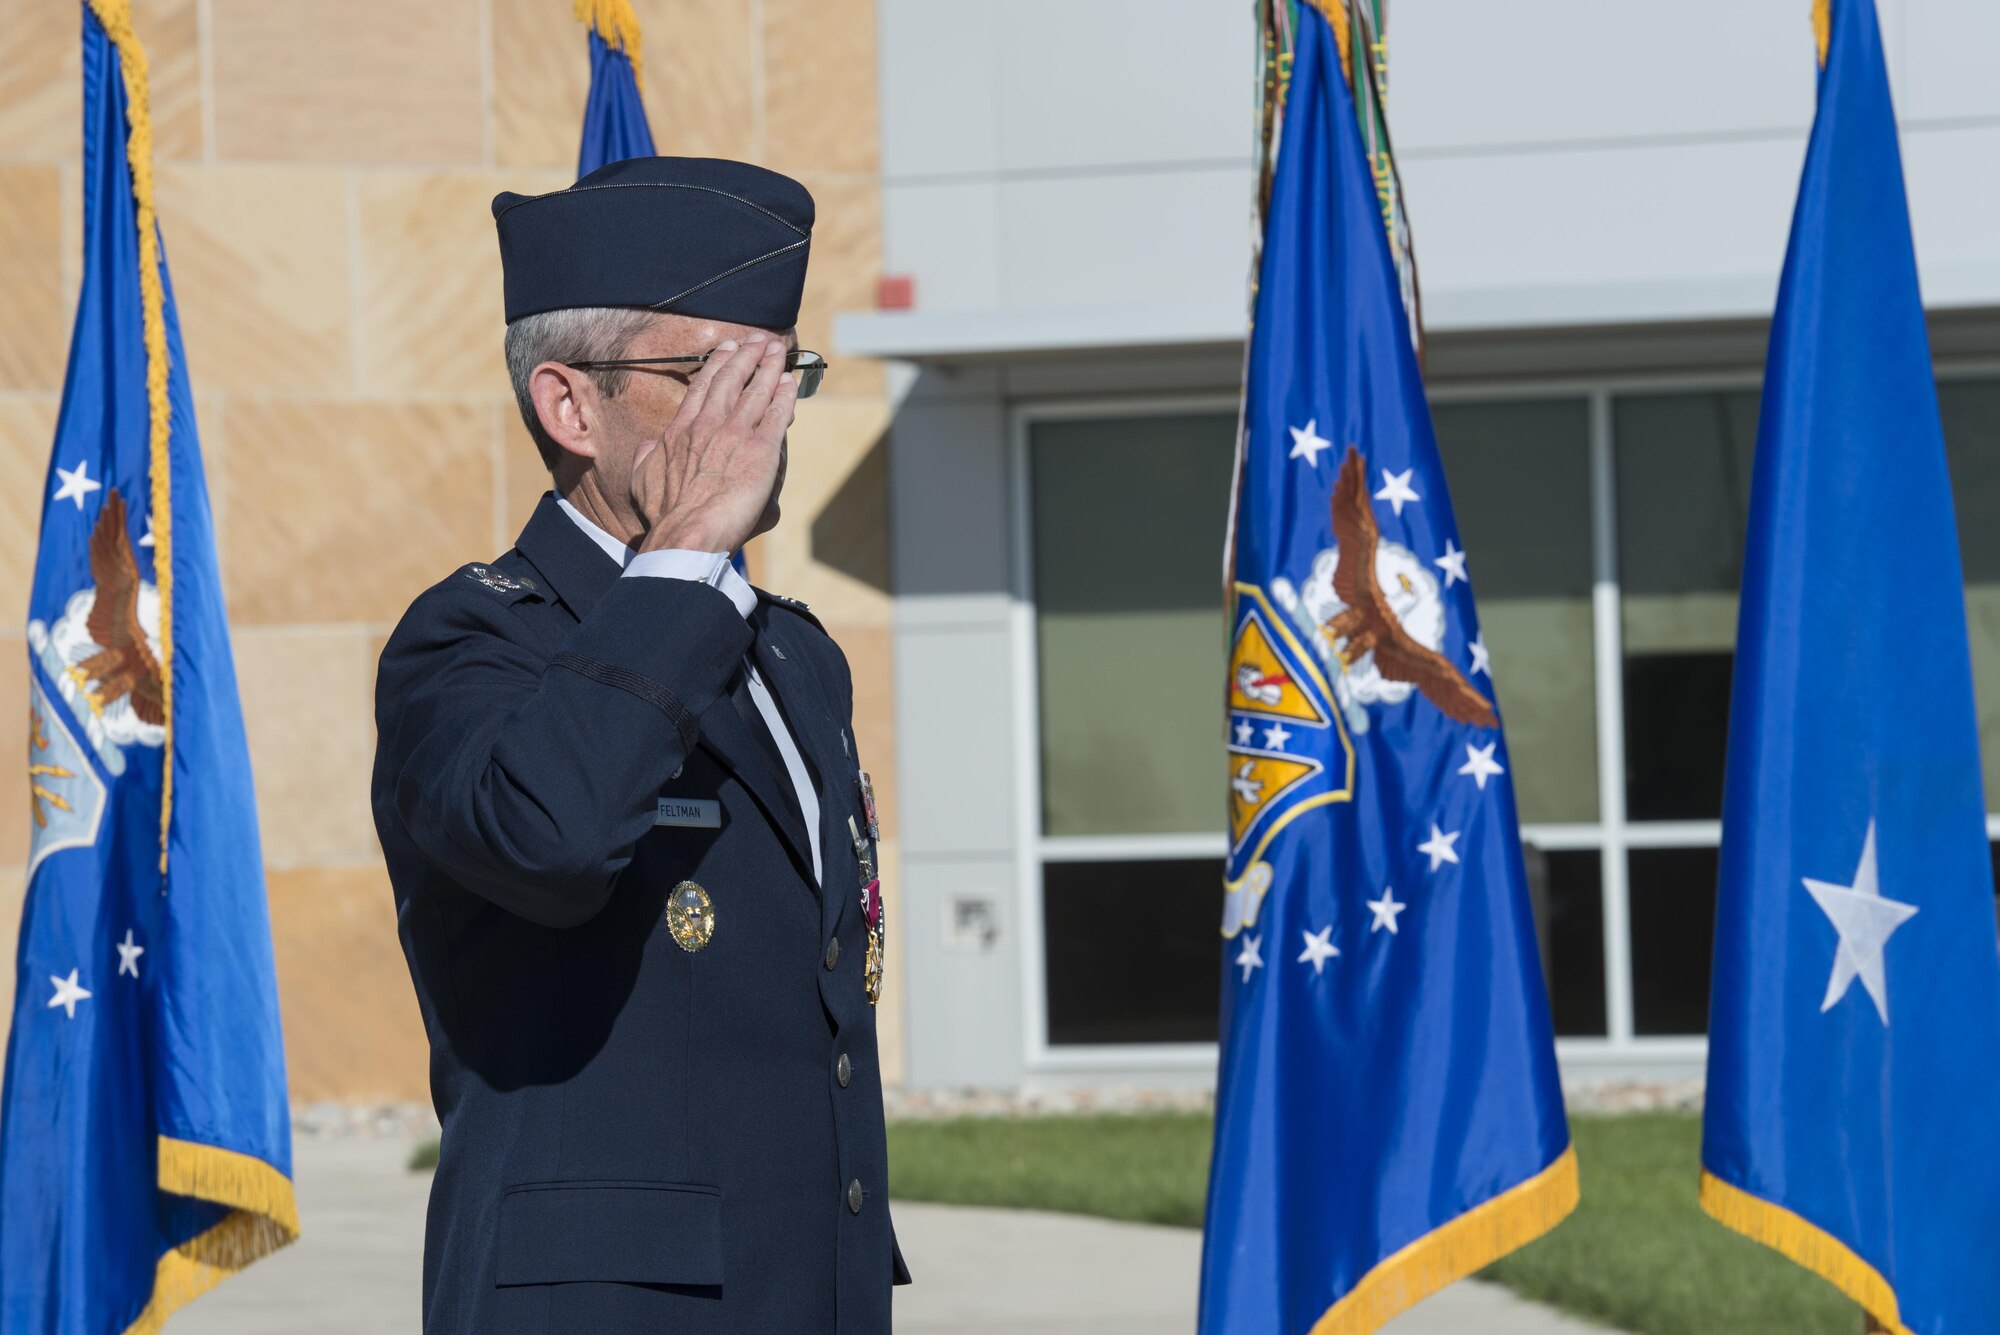 Maj. Gen. Richard W. Scobee, 10th Air Force commander, presents Col. Damon S. Feltman with the Legion of Merit award for his service during the colonel’s time as commander of the 310th Space Wing during a change of command ceremony, Schriever AFB, Colo., Sept. 17, 2016.
(U.S. Air Force photo by Staff Sgt. Christopher Moore/Released) 